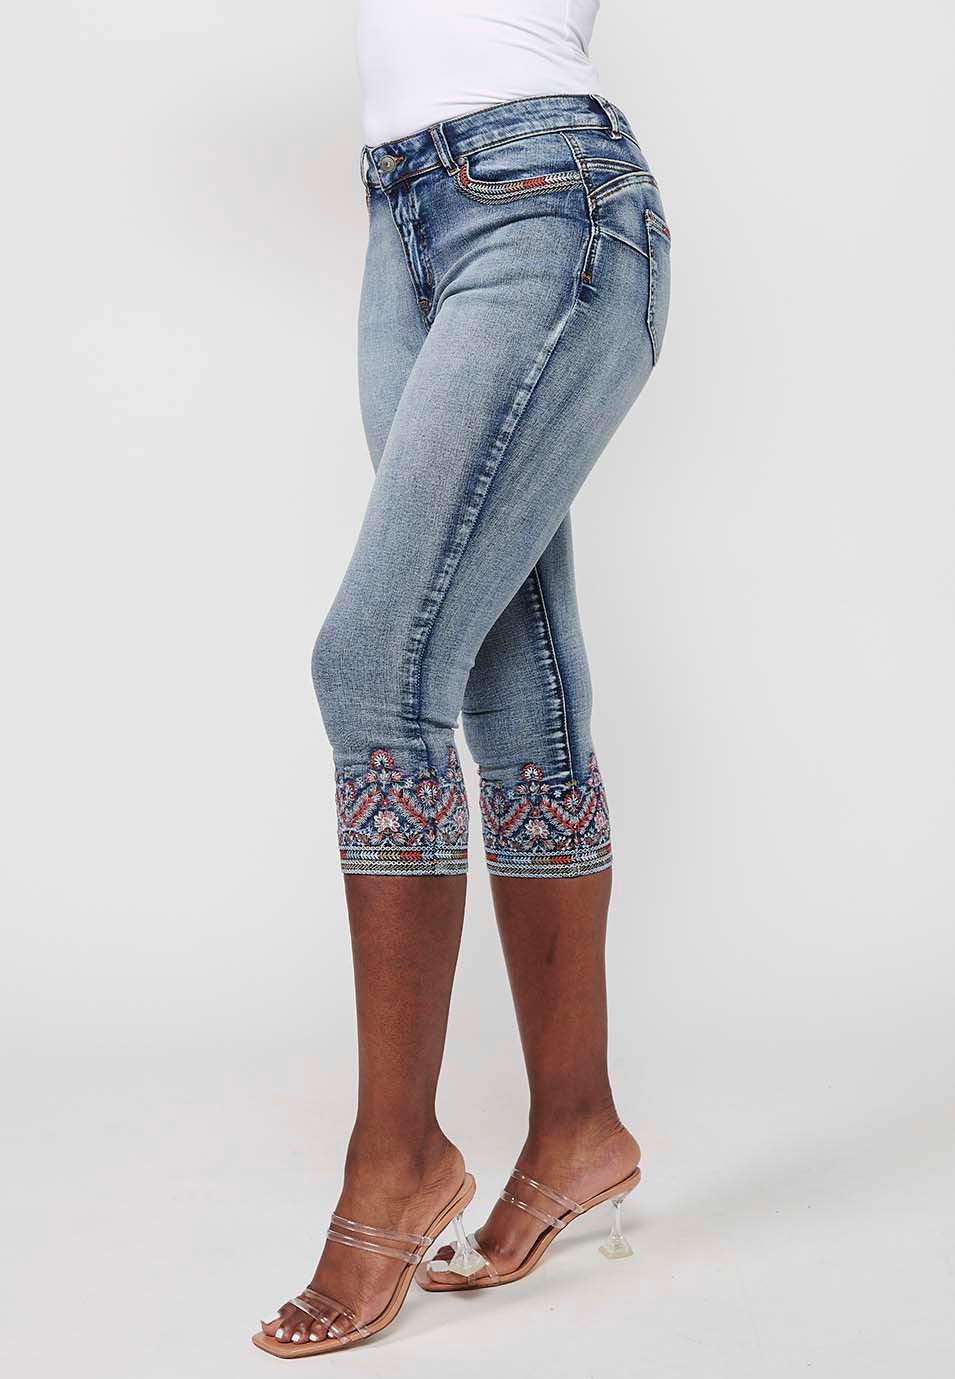 Pirate denim pants with embroidered details and worn effect in light blue for women